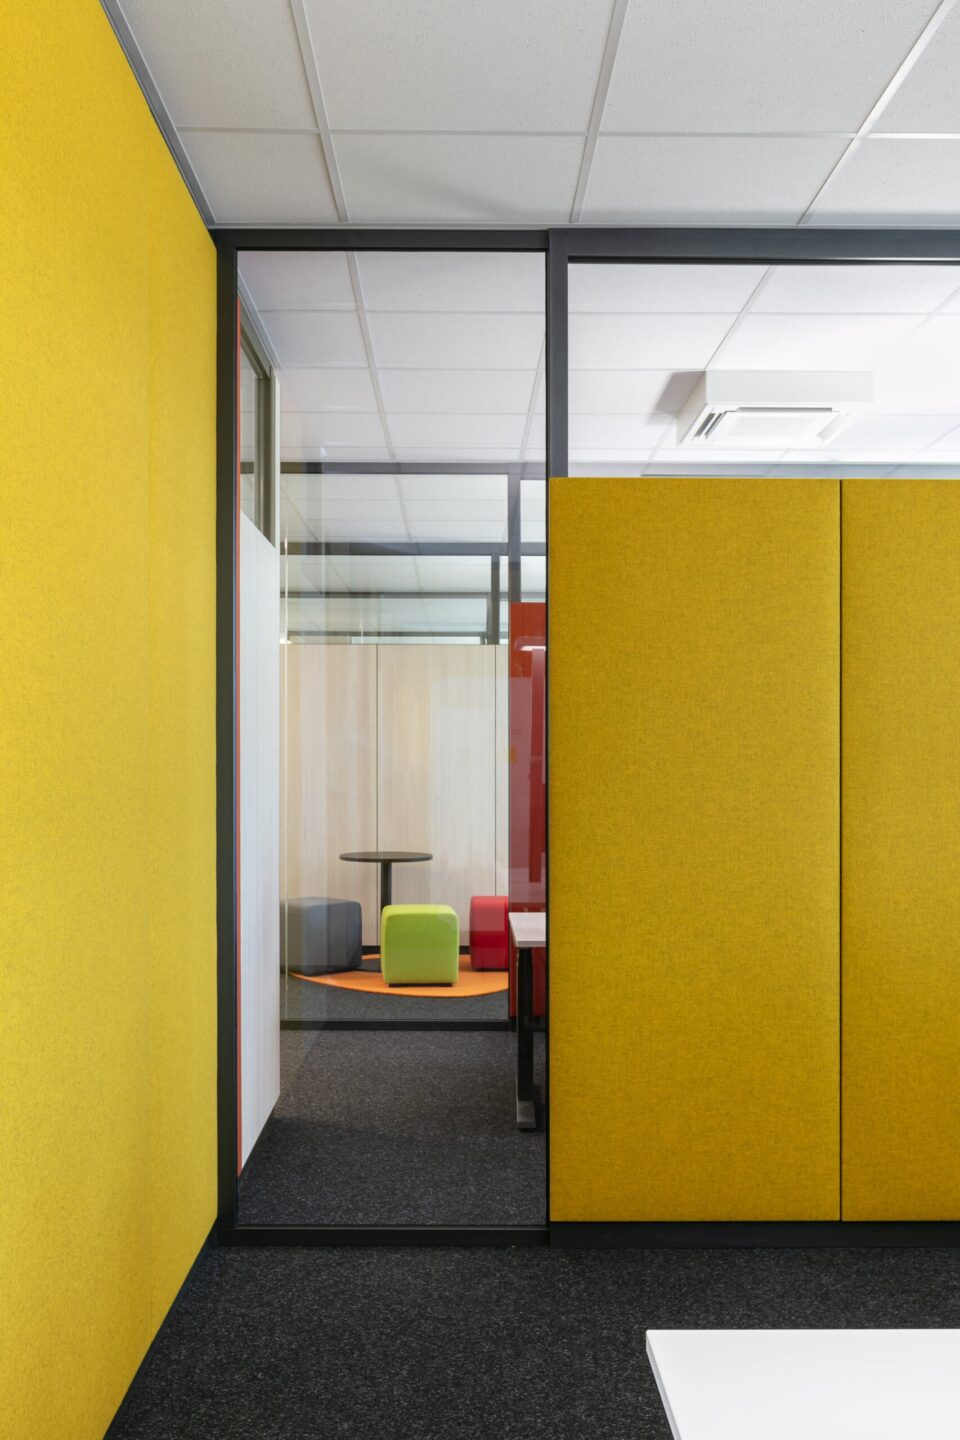 Fraunhofer ISI, Technology Park Karlsruhe │ retreat rooms for concentrated work